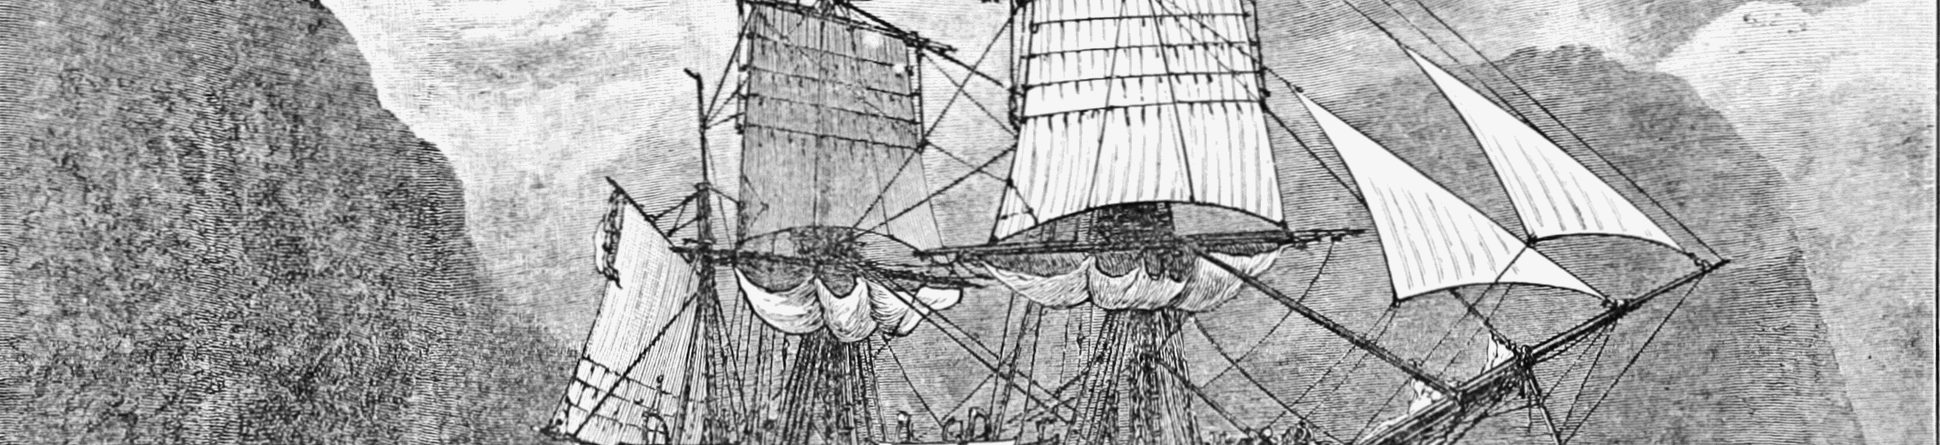 Black and white drawing depicting the HMS Beagle. There are smaller boats around it showing people waving to it.